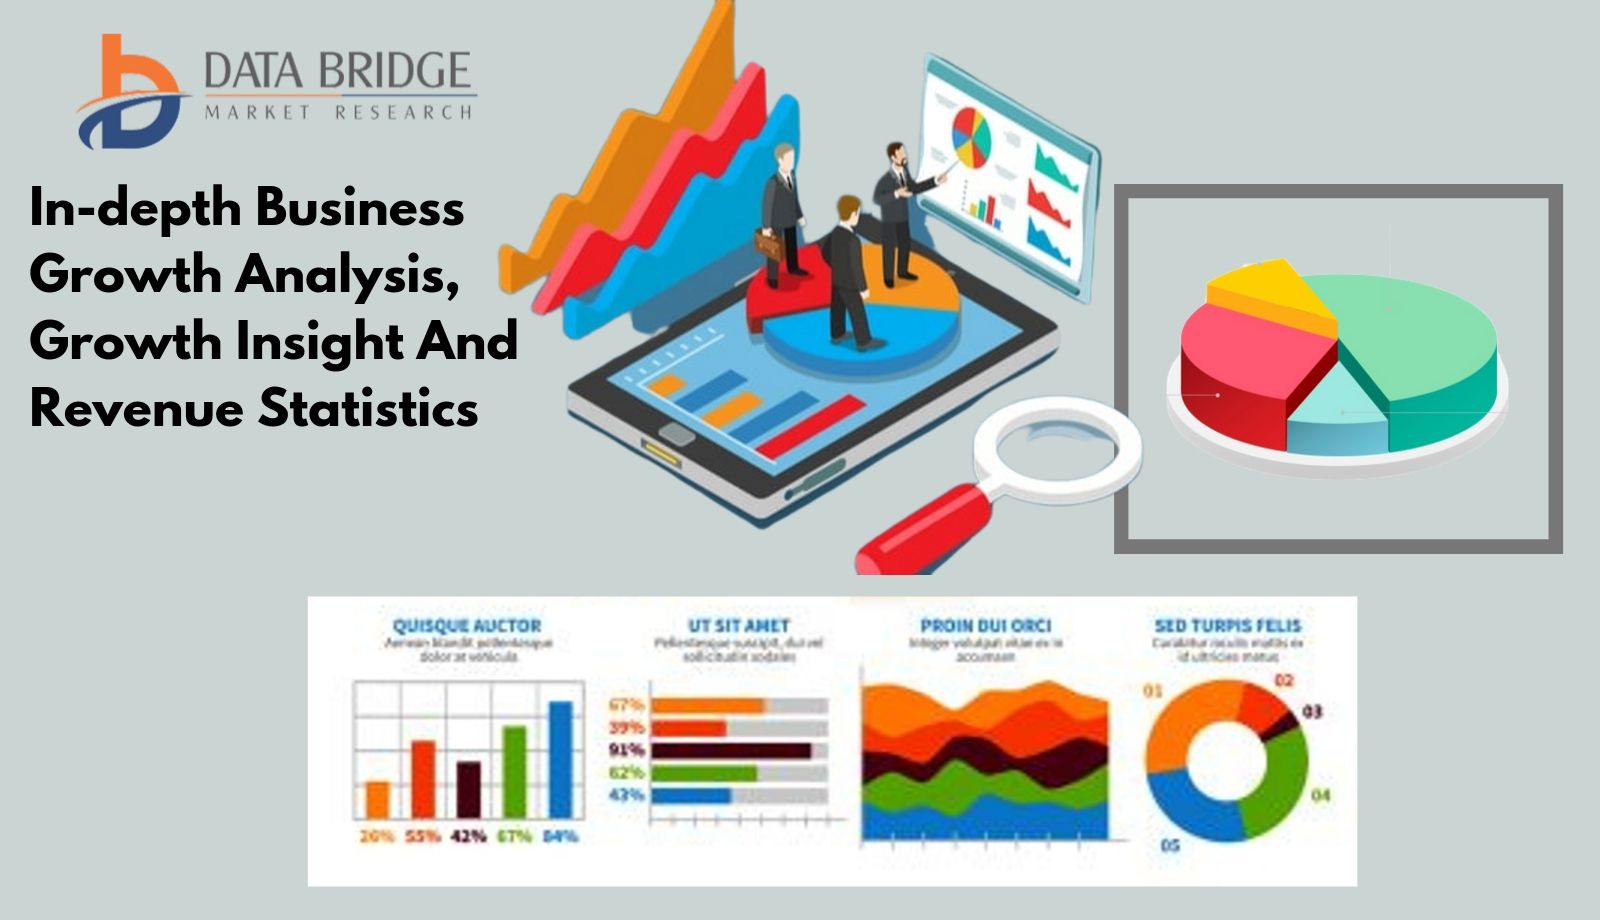 Global AWS managed services market Business Intelligence Report 2019 – Accenture plc, DXC Technology Company, 8K Miles Software Services Ltd., Smartronix Inc., Amazon, and so on